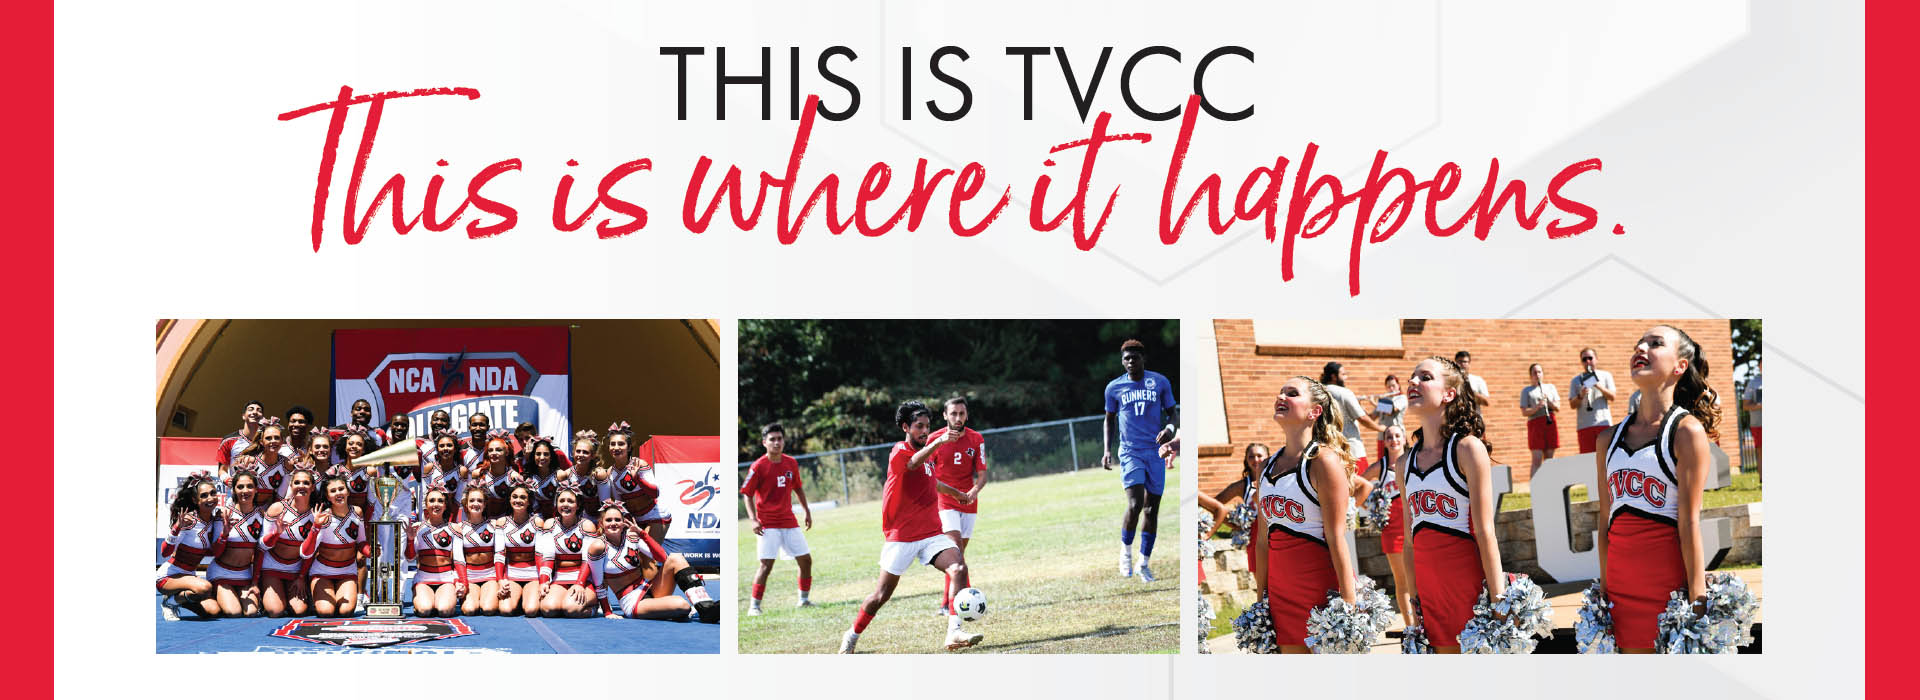 This is TVCC - This is where it happens.